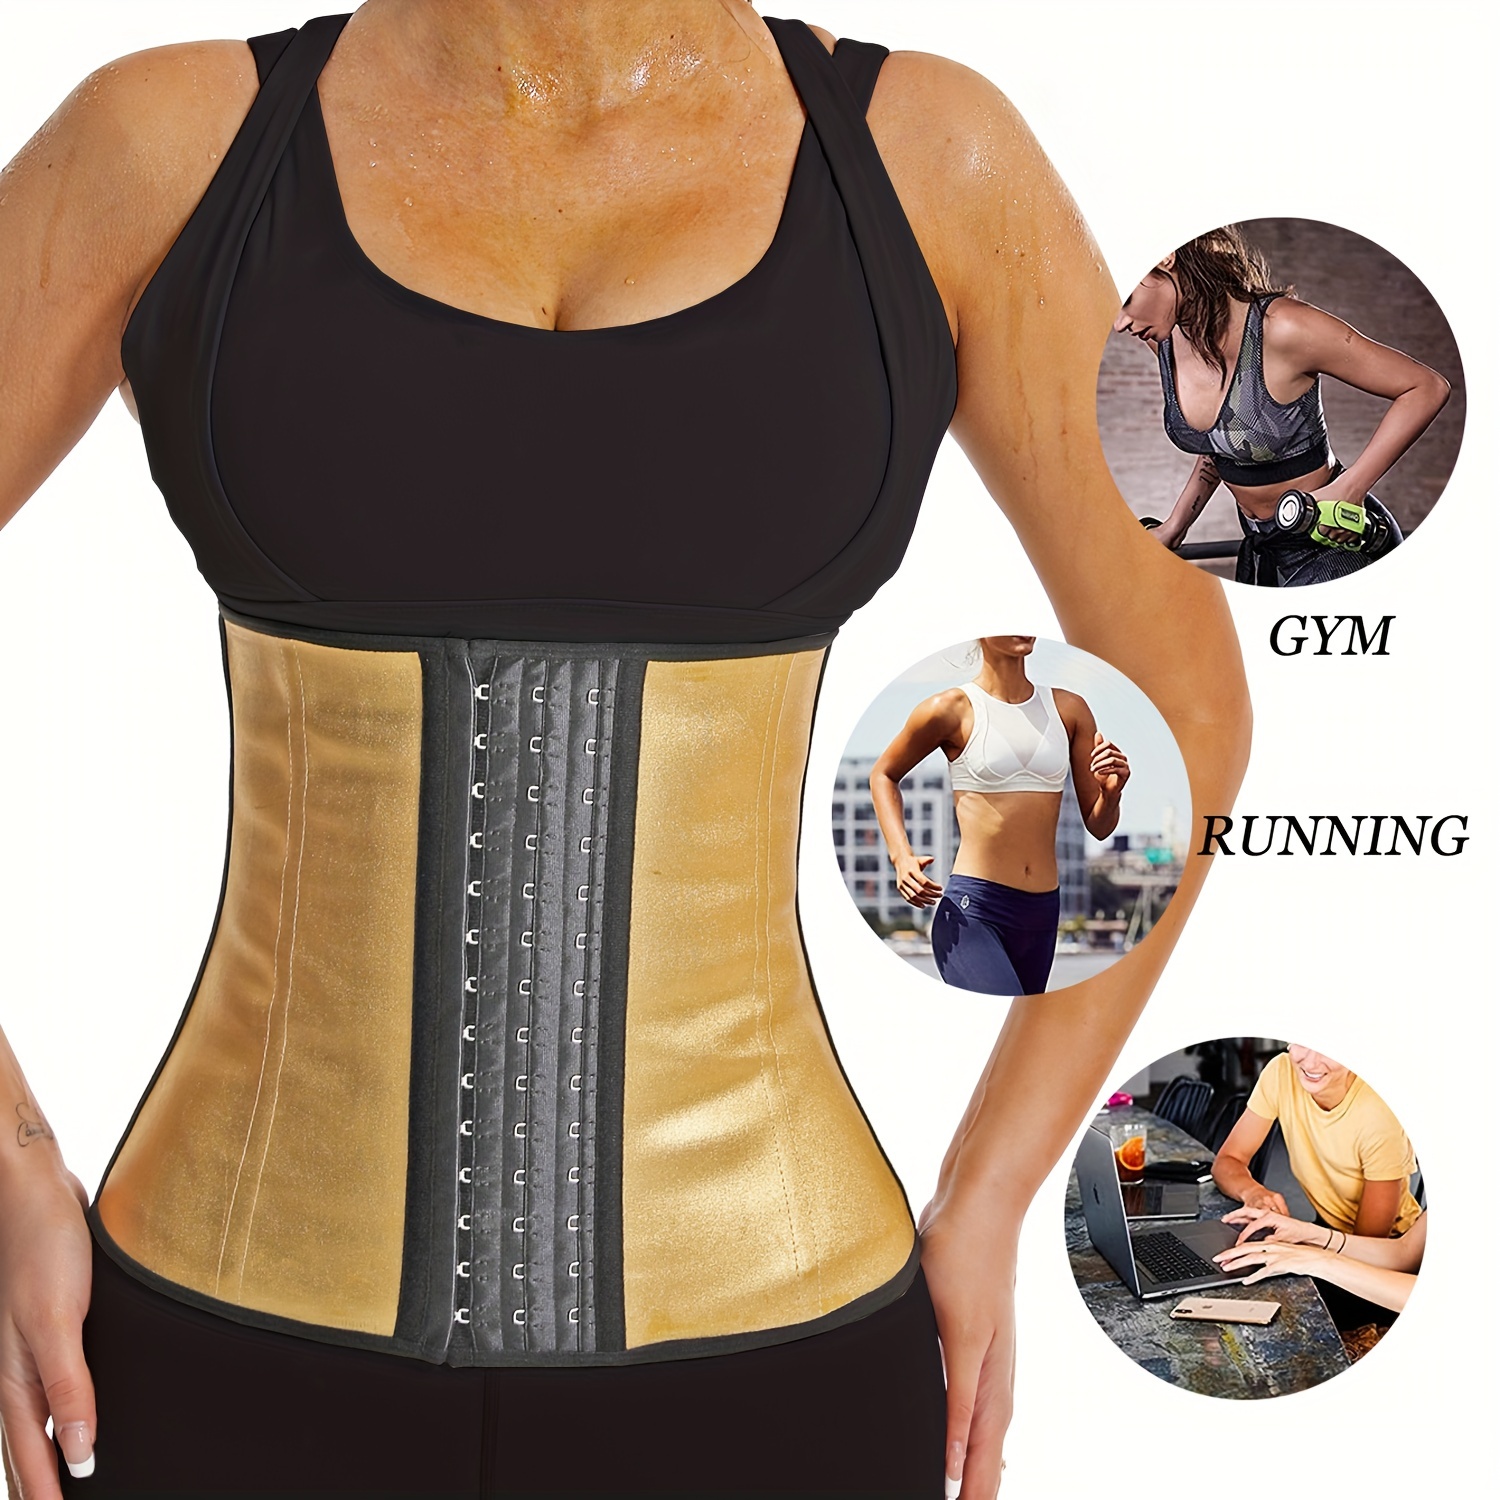 Latex Waist Trainer For Women, 19 Bones Latex Body Shaper Slimming Tummy  Control Shapewear, Waist Support For Weight Loss Fitness